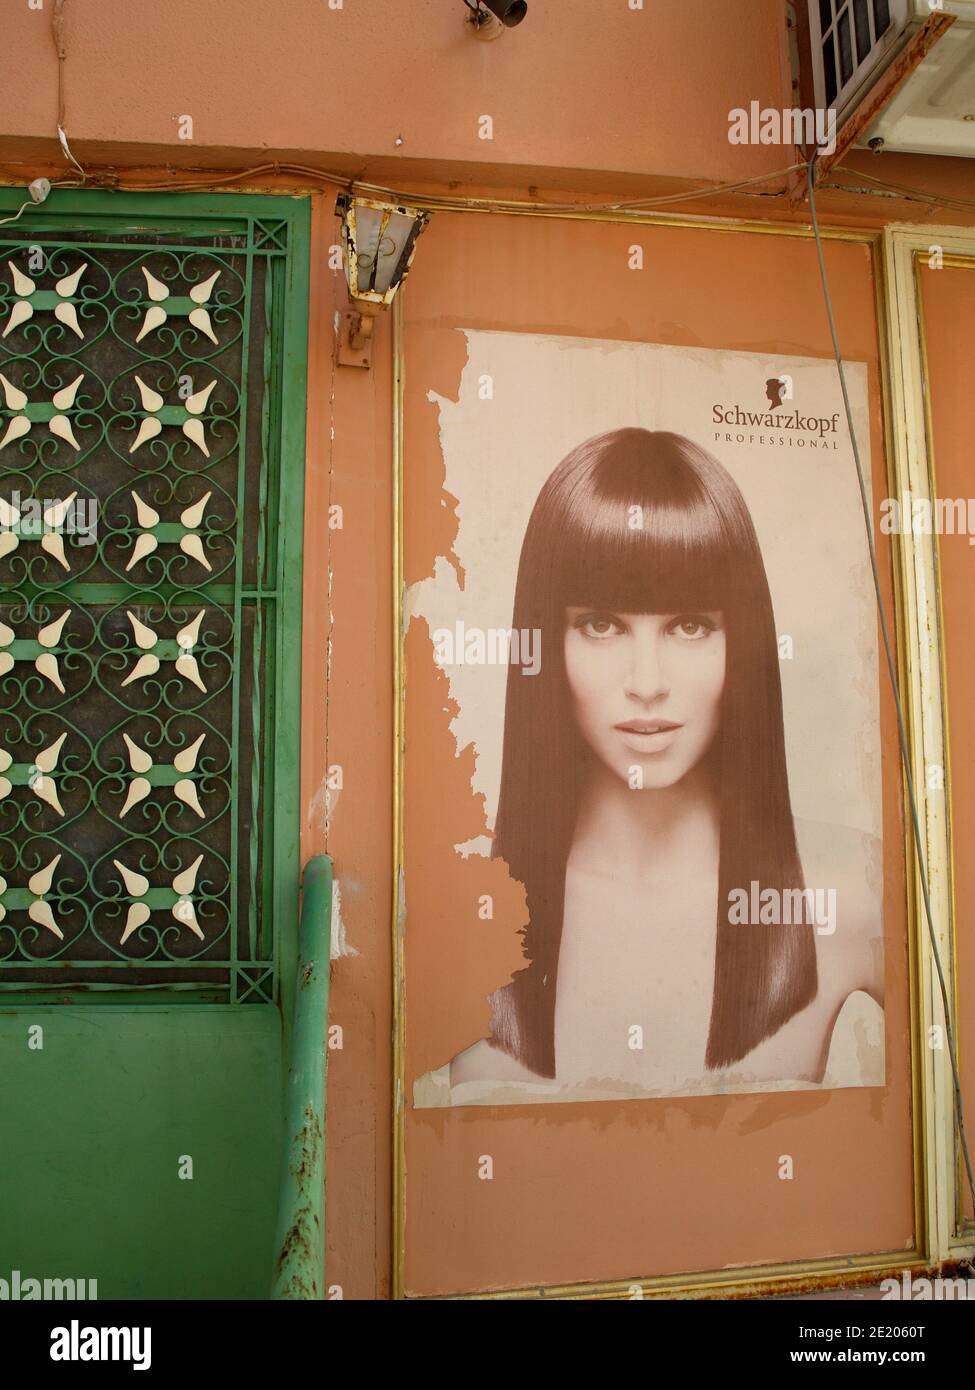 Old Schwarzkopf advertising at hairdressers in in Nymfes, Corfu, Greece Stock Photo